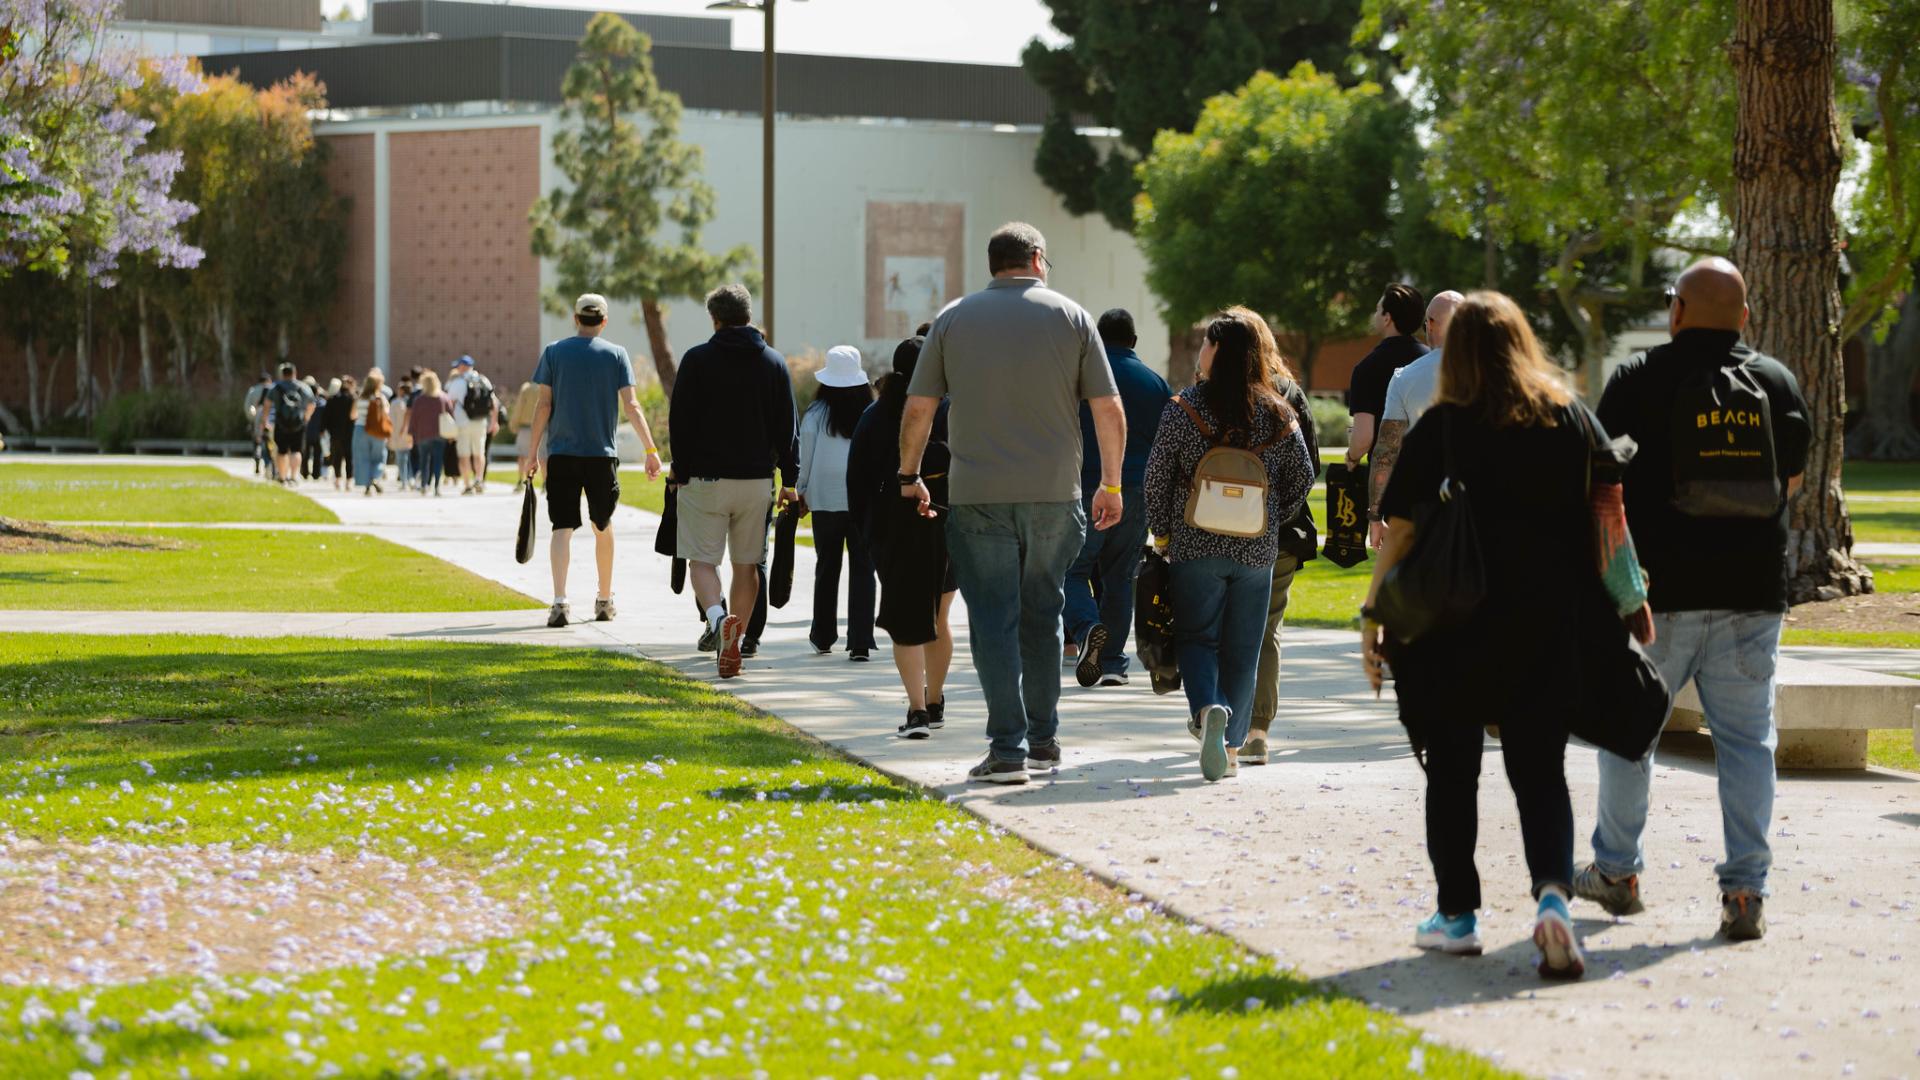 A group of people walking along a pathway on a green campus, heading towards a building in the background.